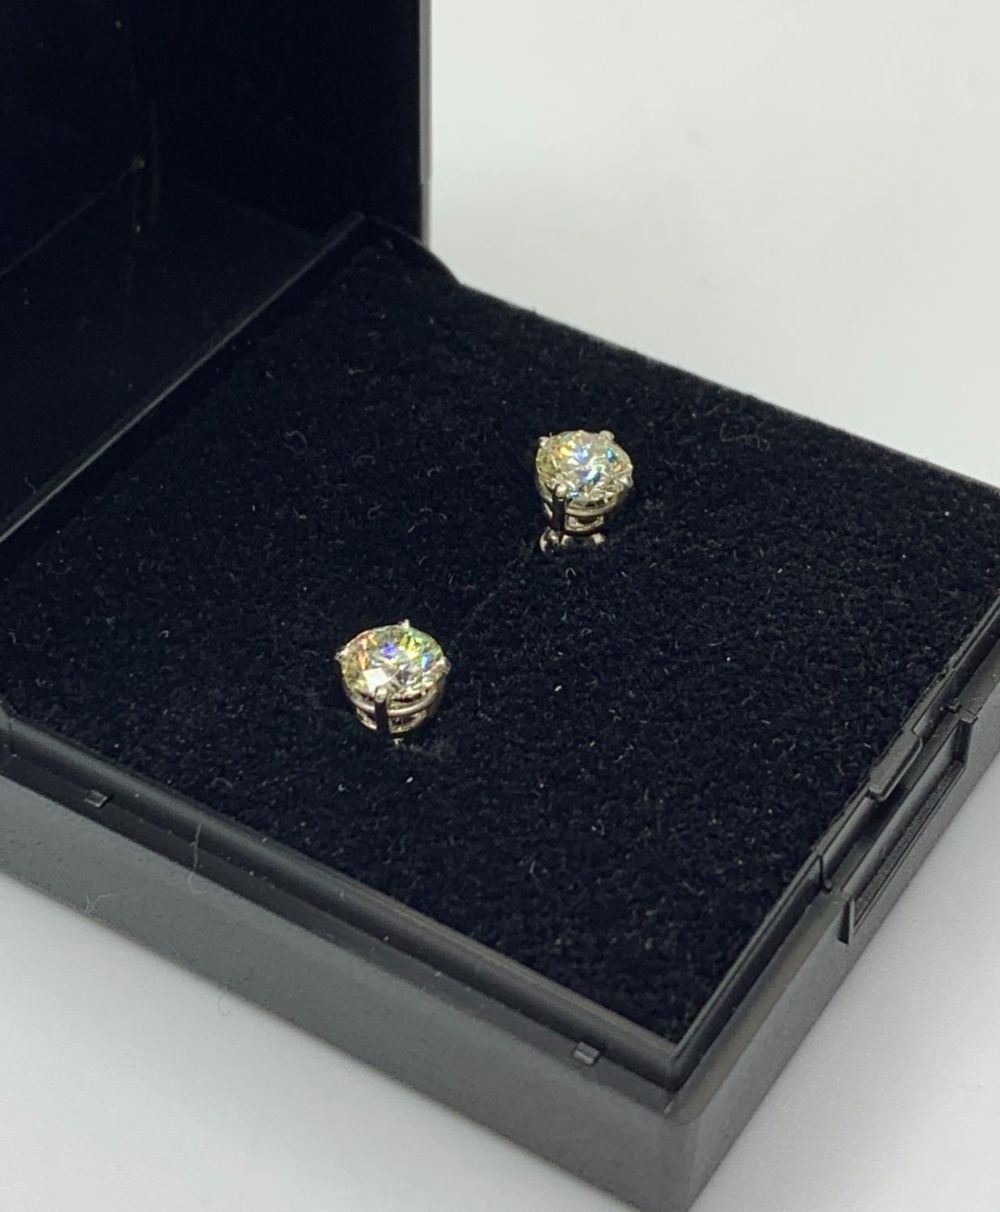 Pair of Diamond Stud Earrings with 1.02ct diamond in 18ct white gold - Image 2 of 4